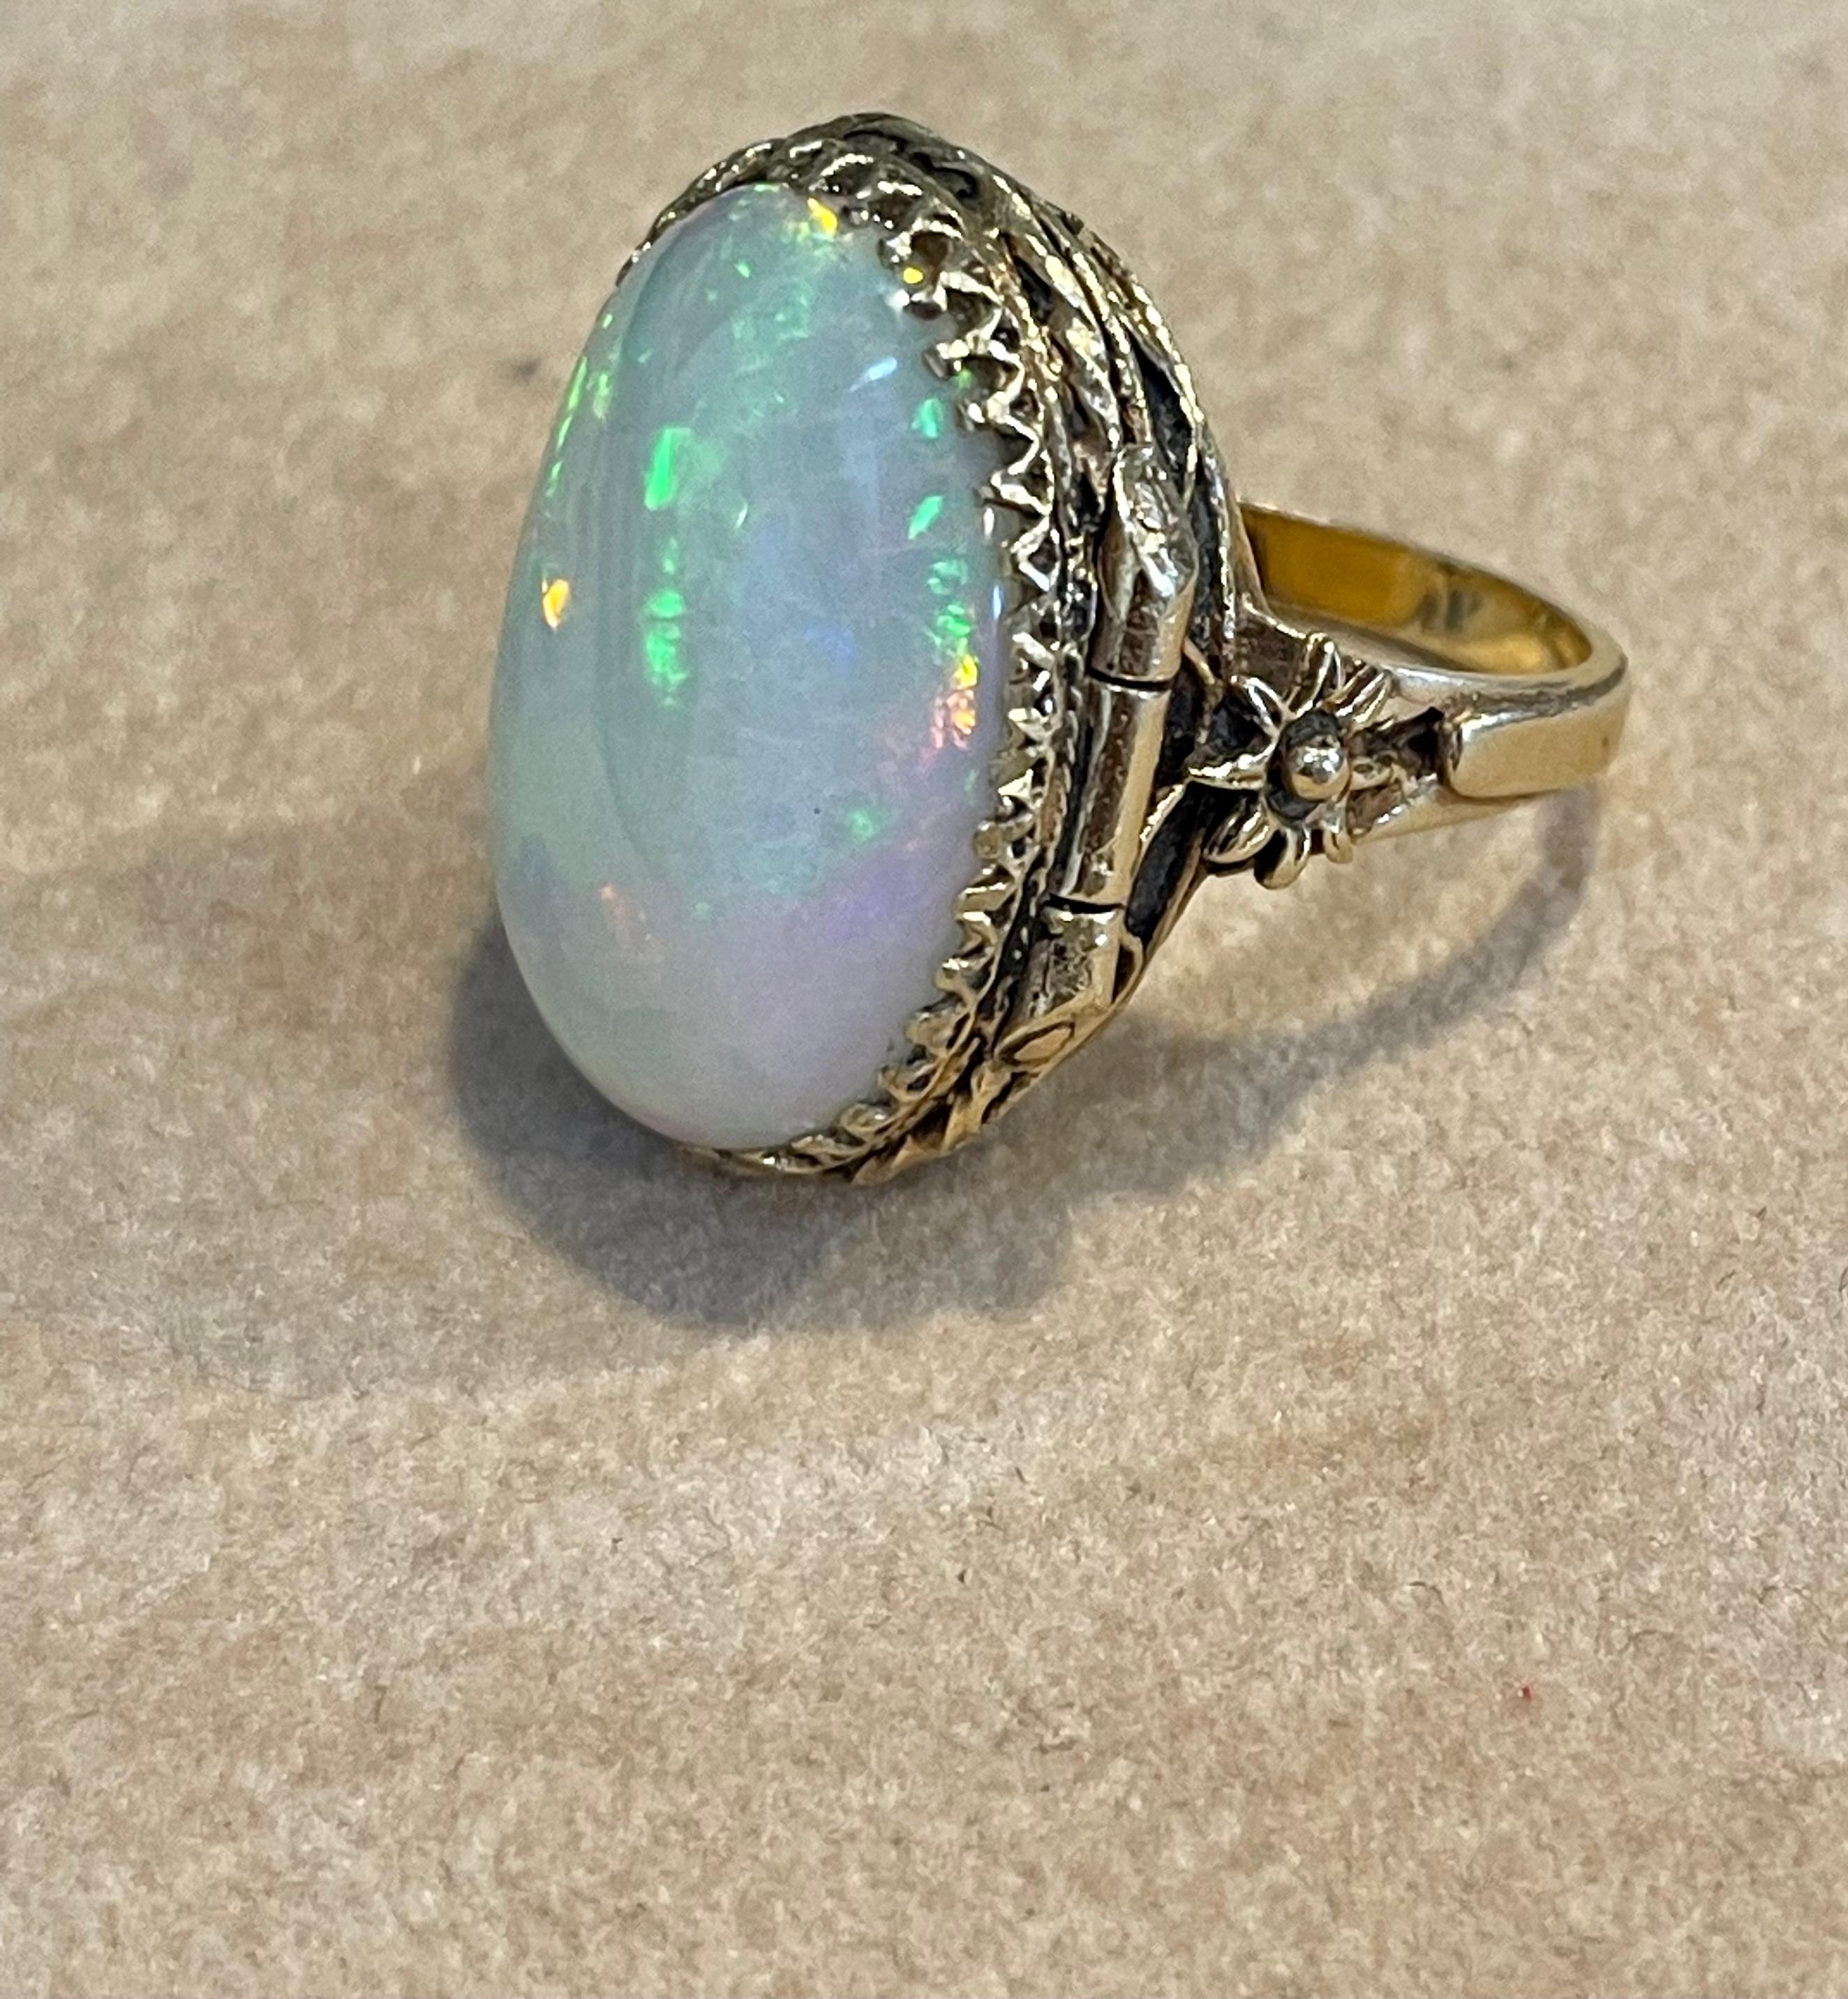 16 Ct Oval Shape Ethiopian Opal Cocktail Ring 14 Kt Yellow Gold Pill Keeper Ring 1